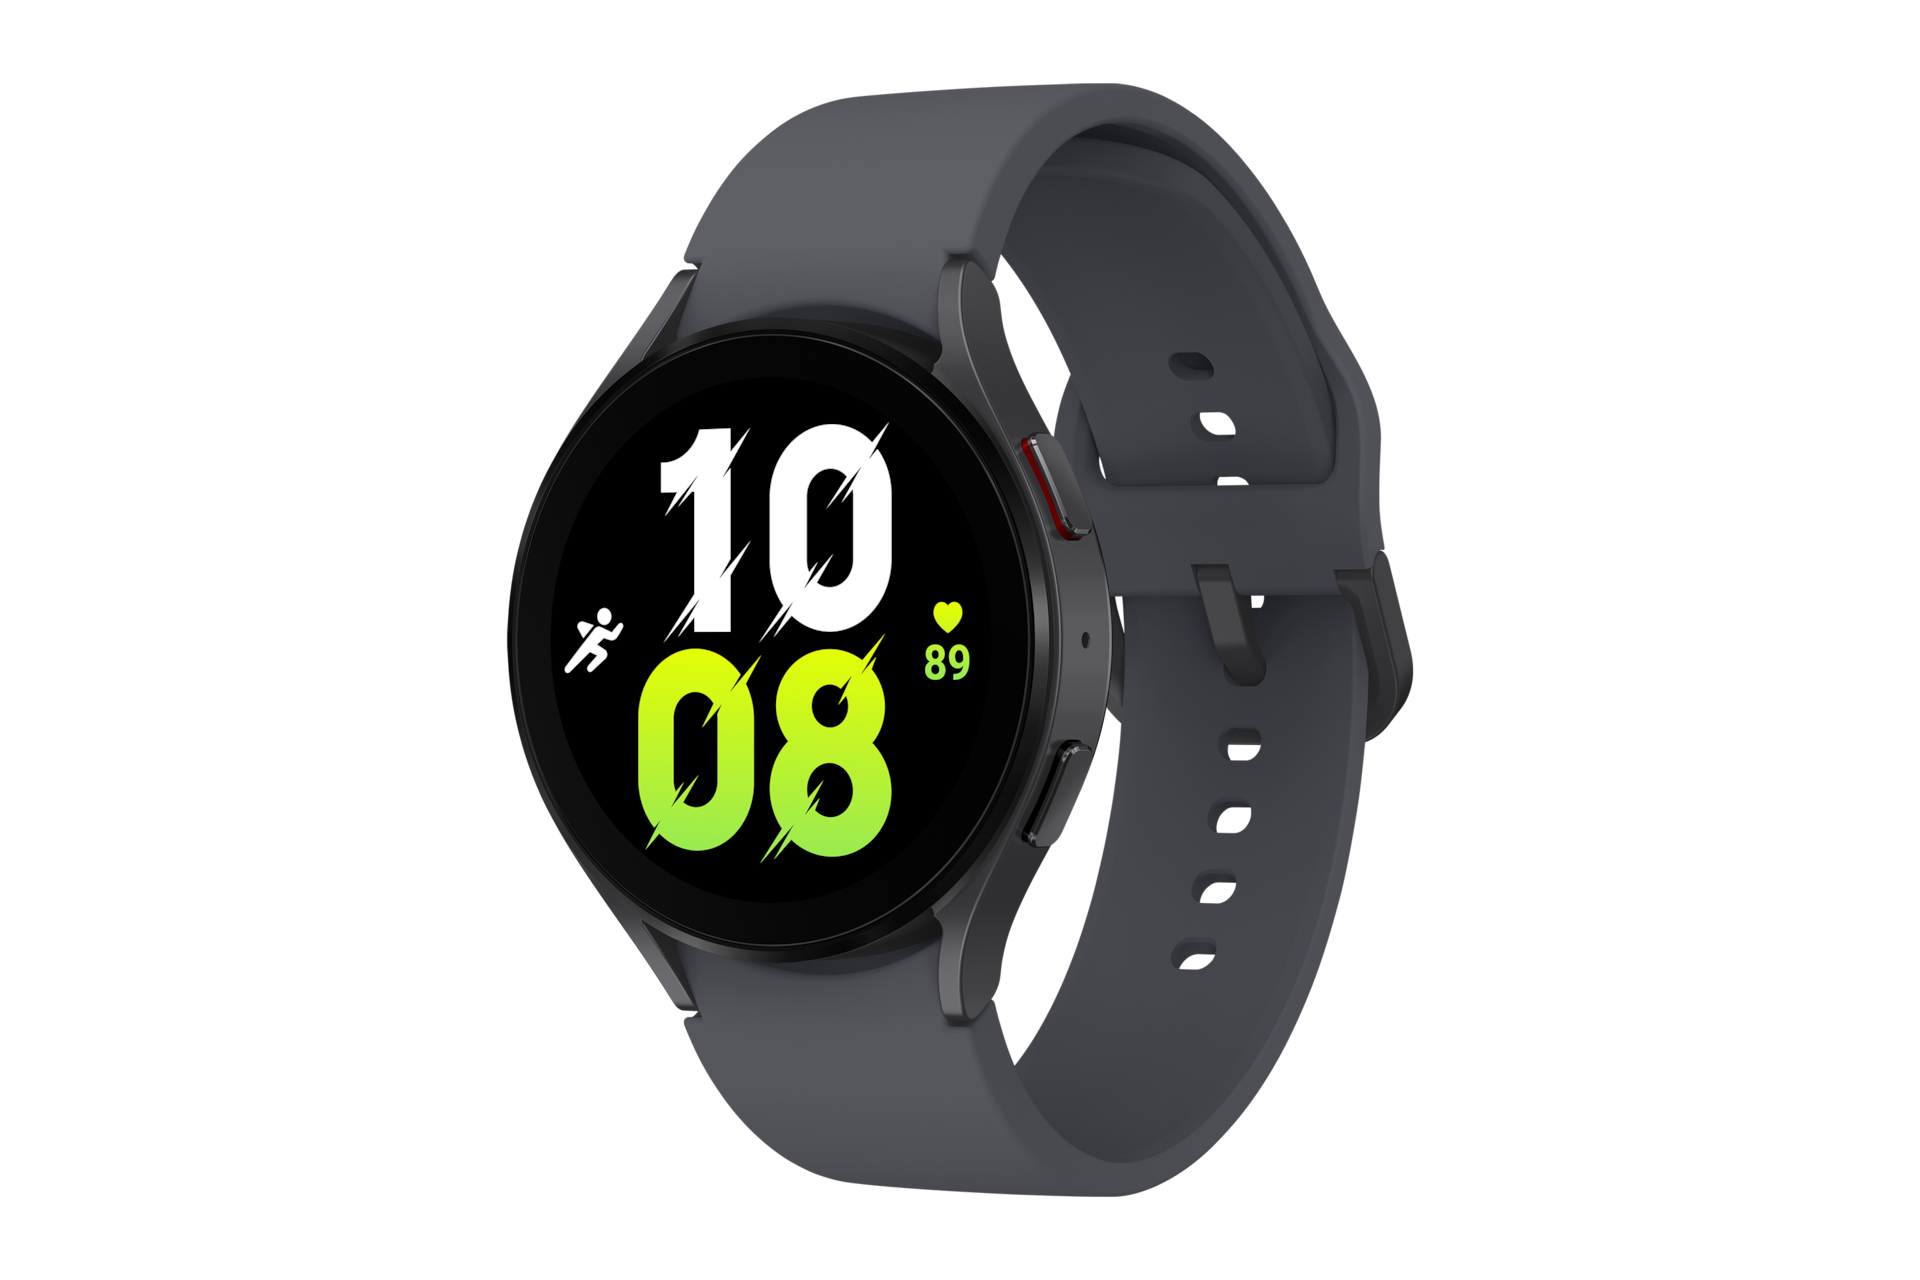 Shop online for the Galaxy Watch5 44mm for specs, features, release dates, and the price. Your smartwatch for your health and wellness. Galaxy Watch5 in Graphite seen from front right.